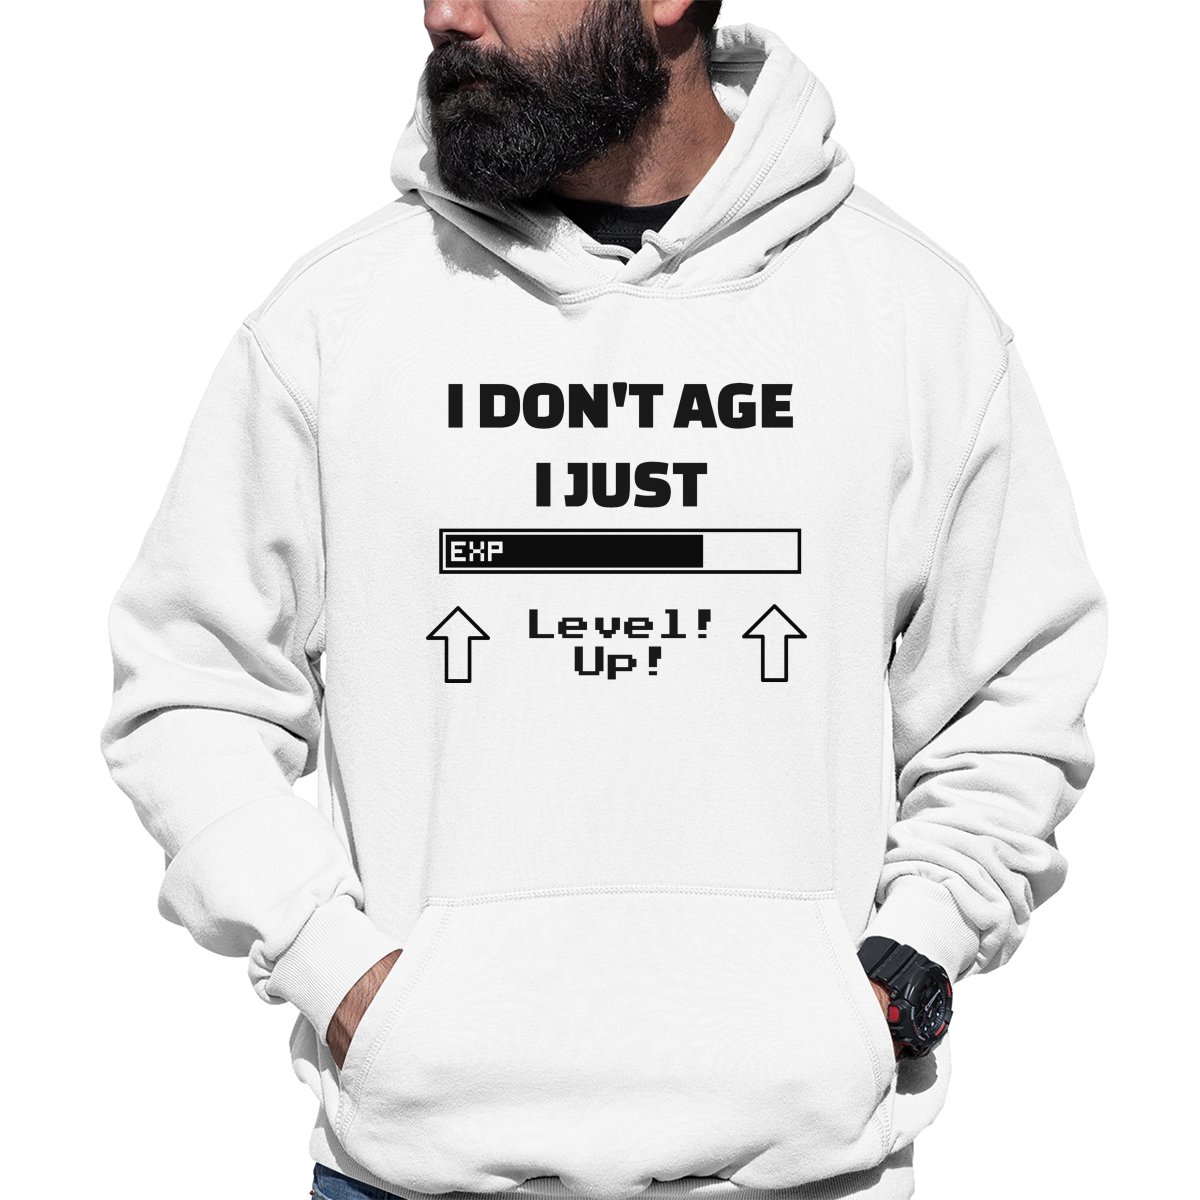 LV Hoodie - levelup